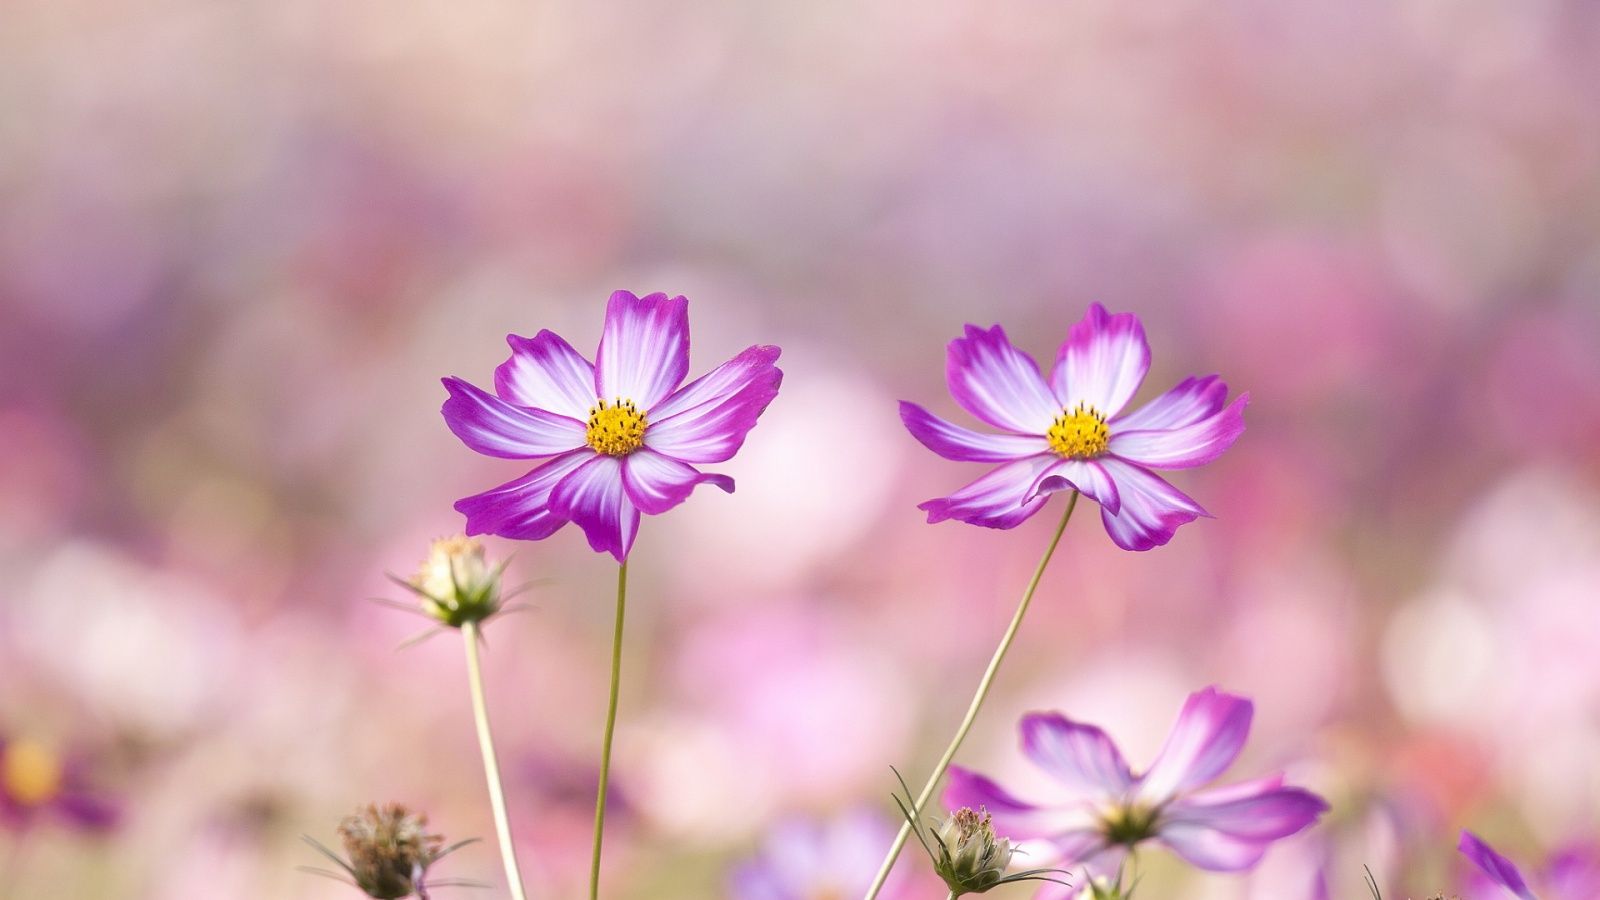 22 Description: The Wallpapers above is Summer flowers hd Wallpapers